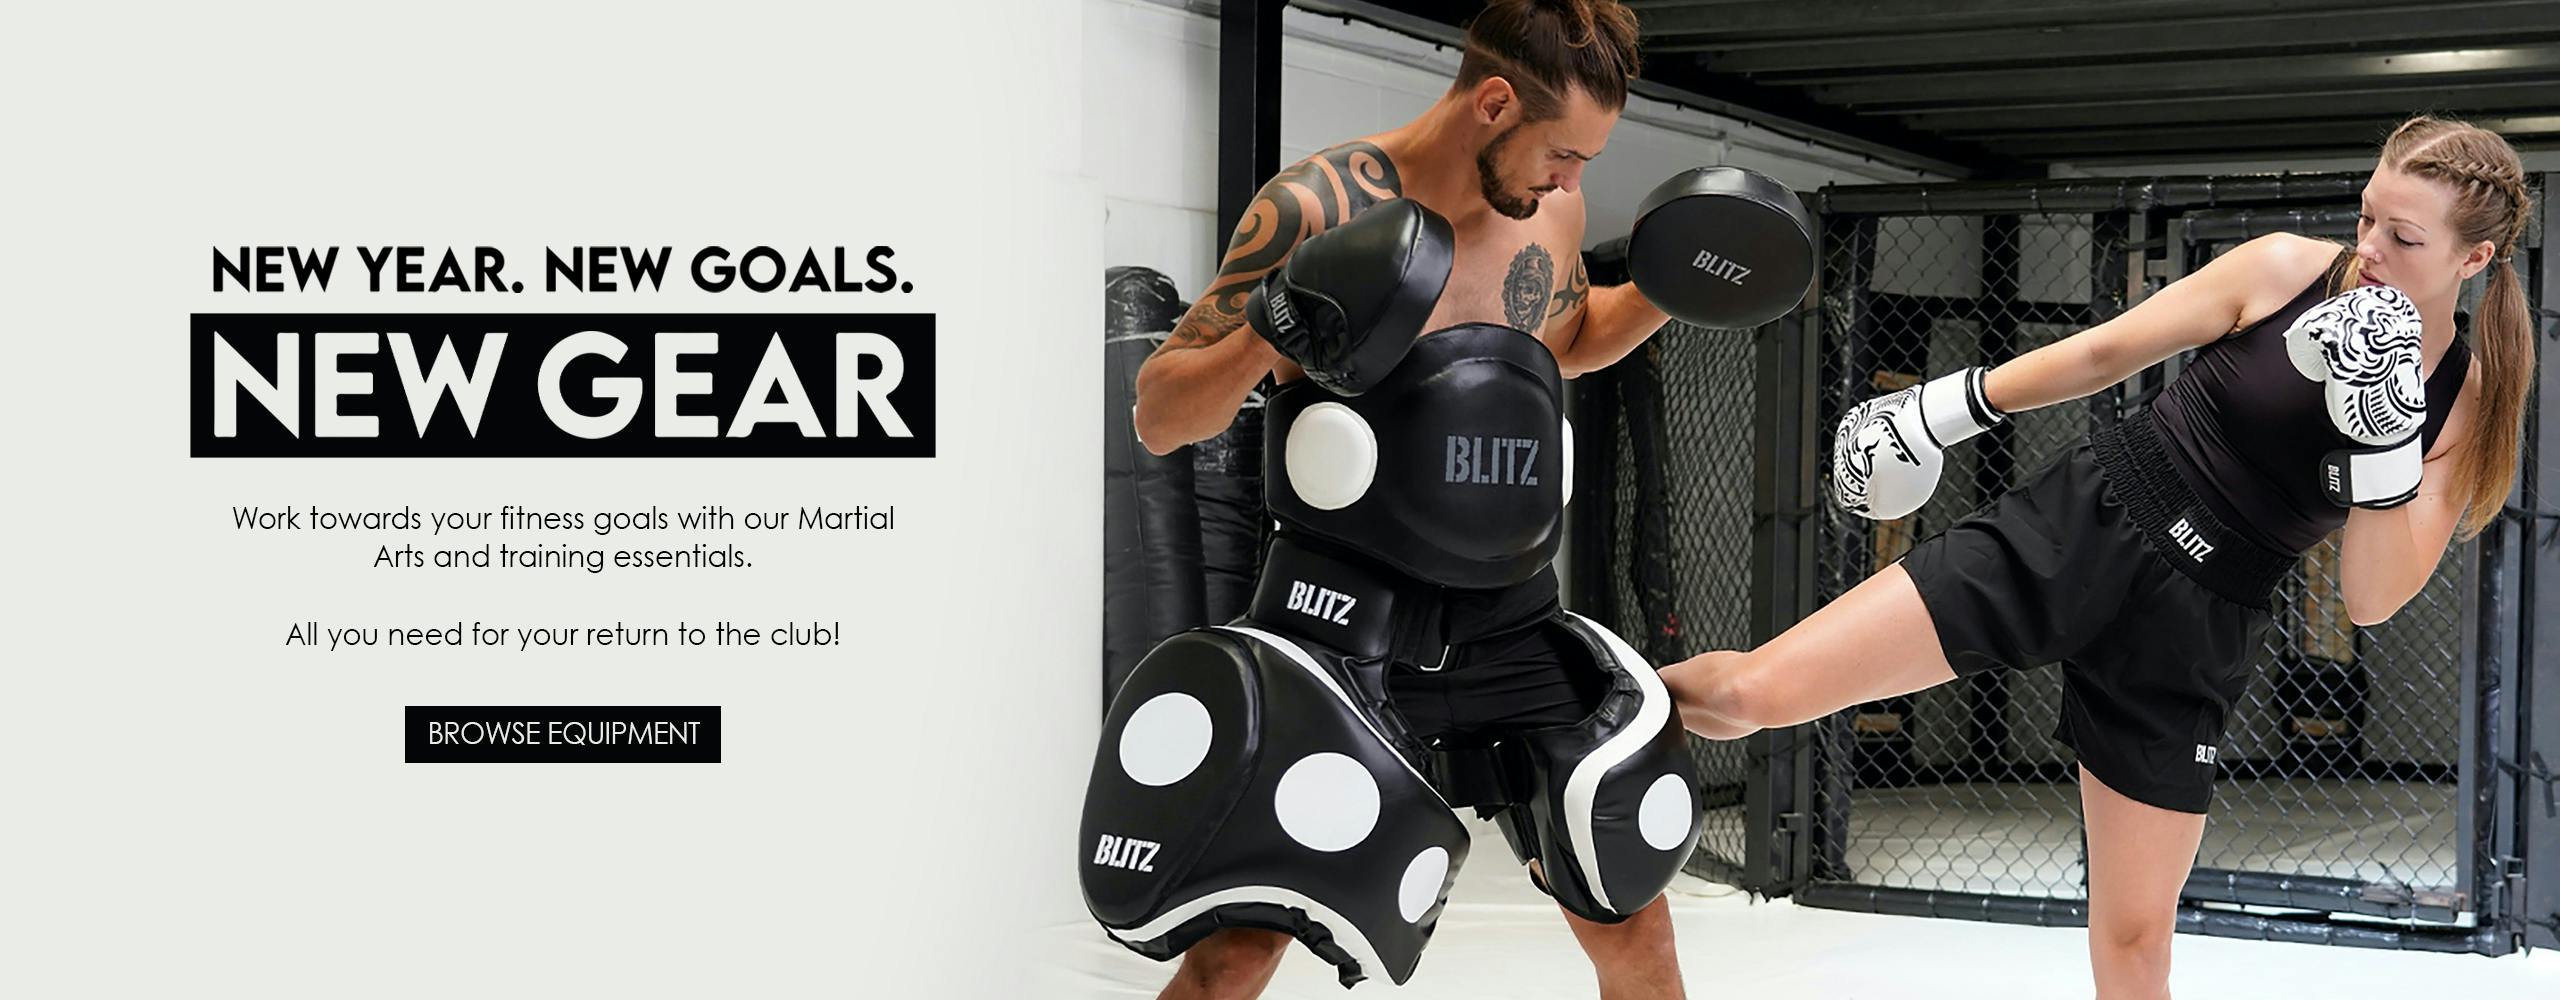 Work towards your fitness goals with our Martial Arts and training essentials at Blitz.